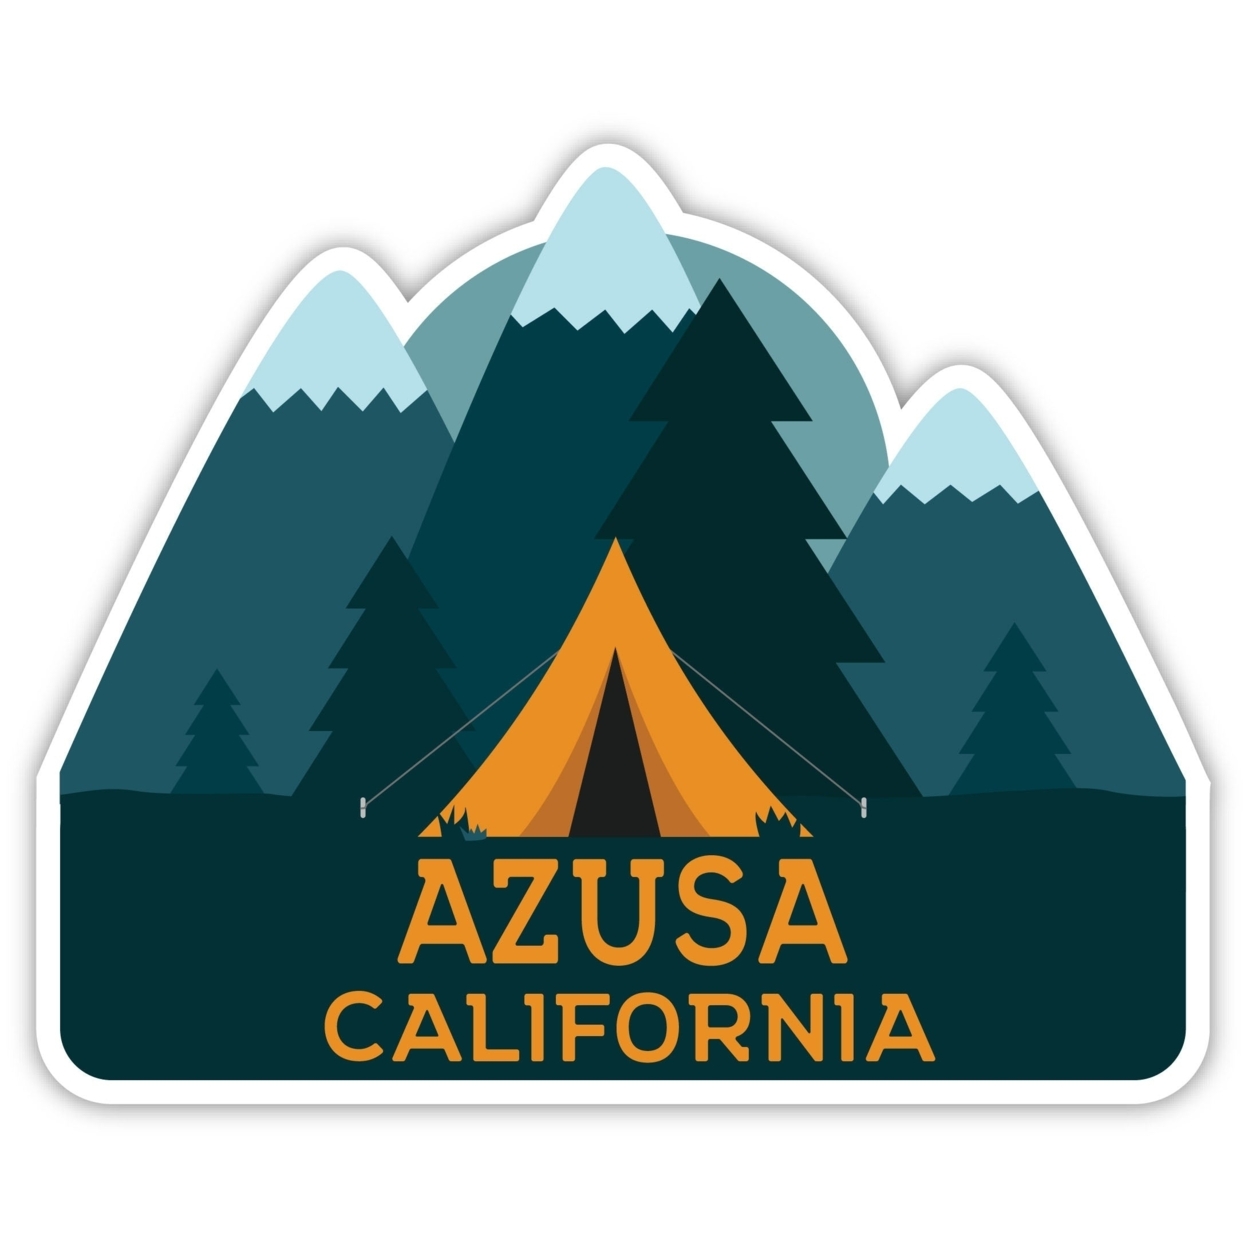 Azusa California Souvenir Decorative Stickers (Choose Theme And Size) - 4-Pack, 4-Inch, Tent